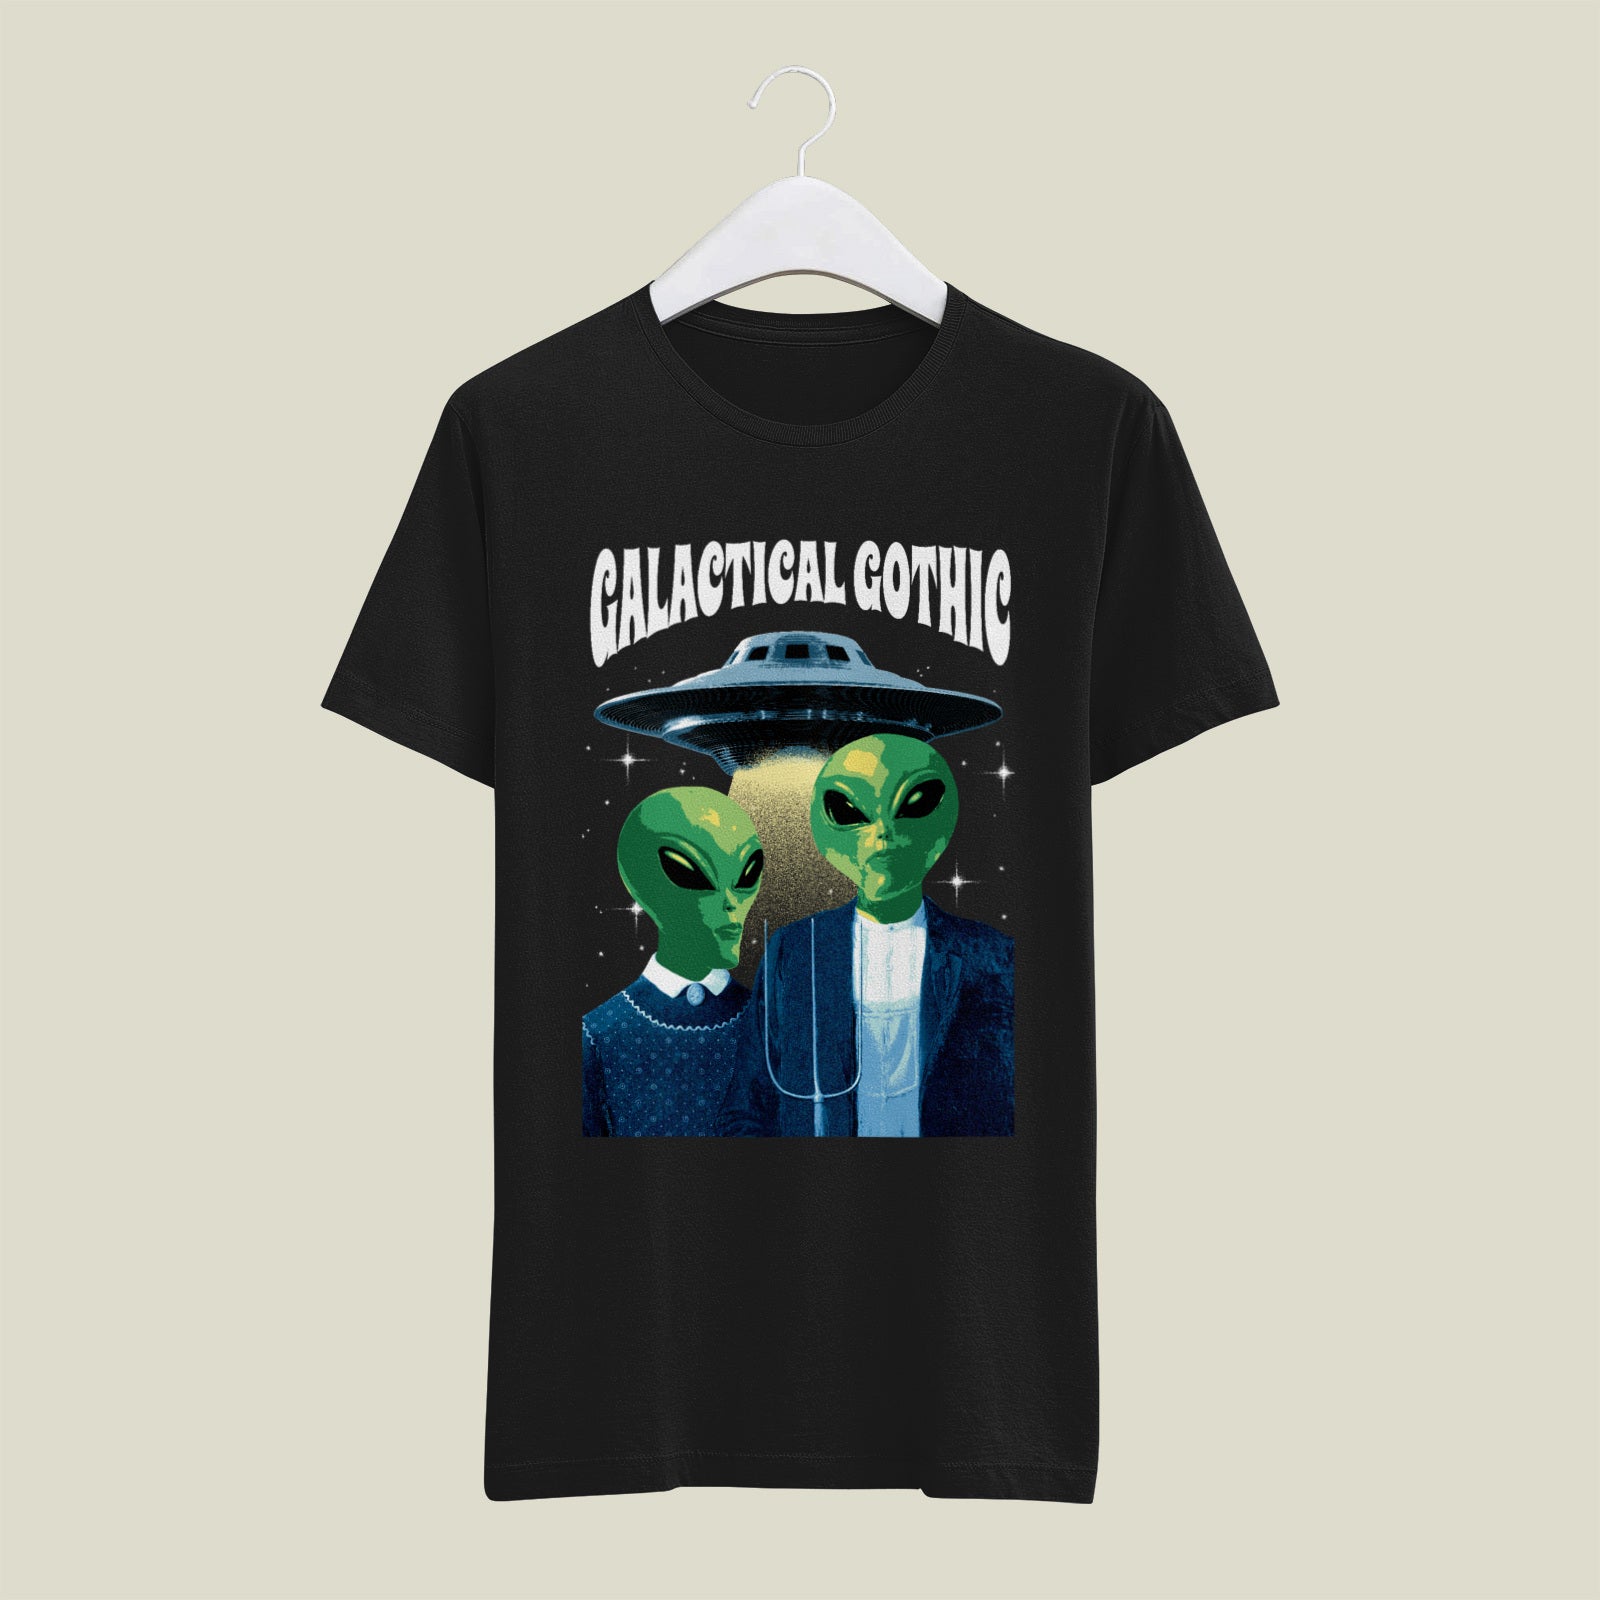 A black American Gothic UFO T-shirt with two aliens.